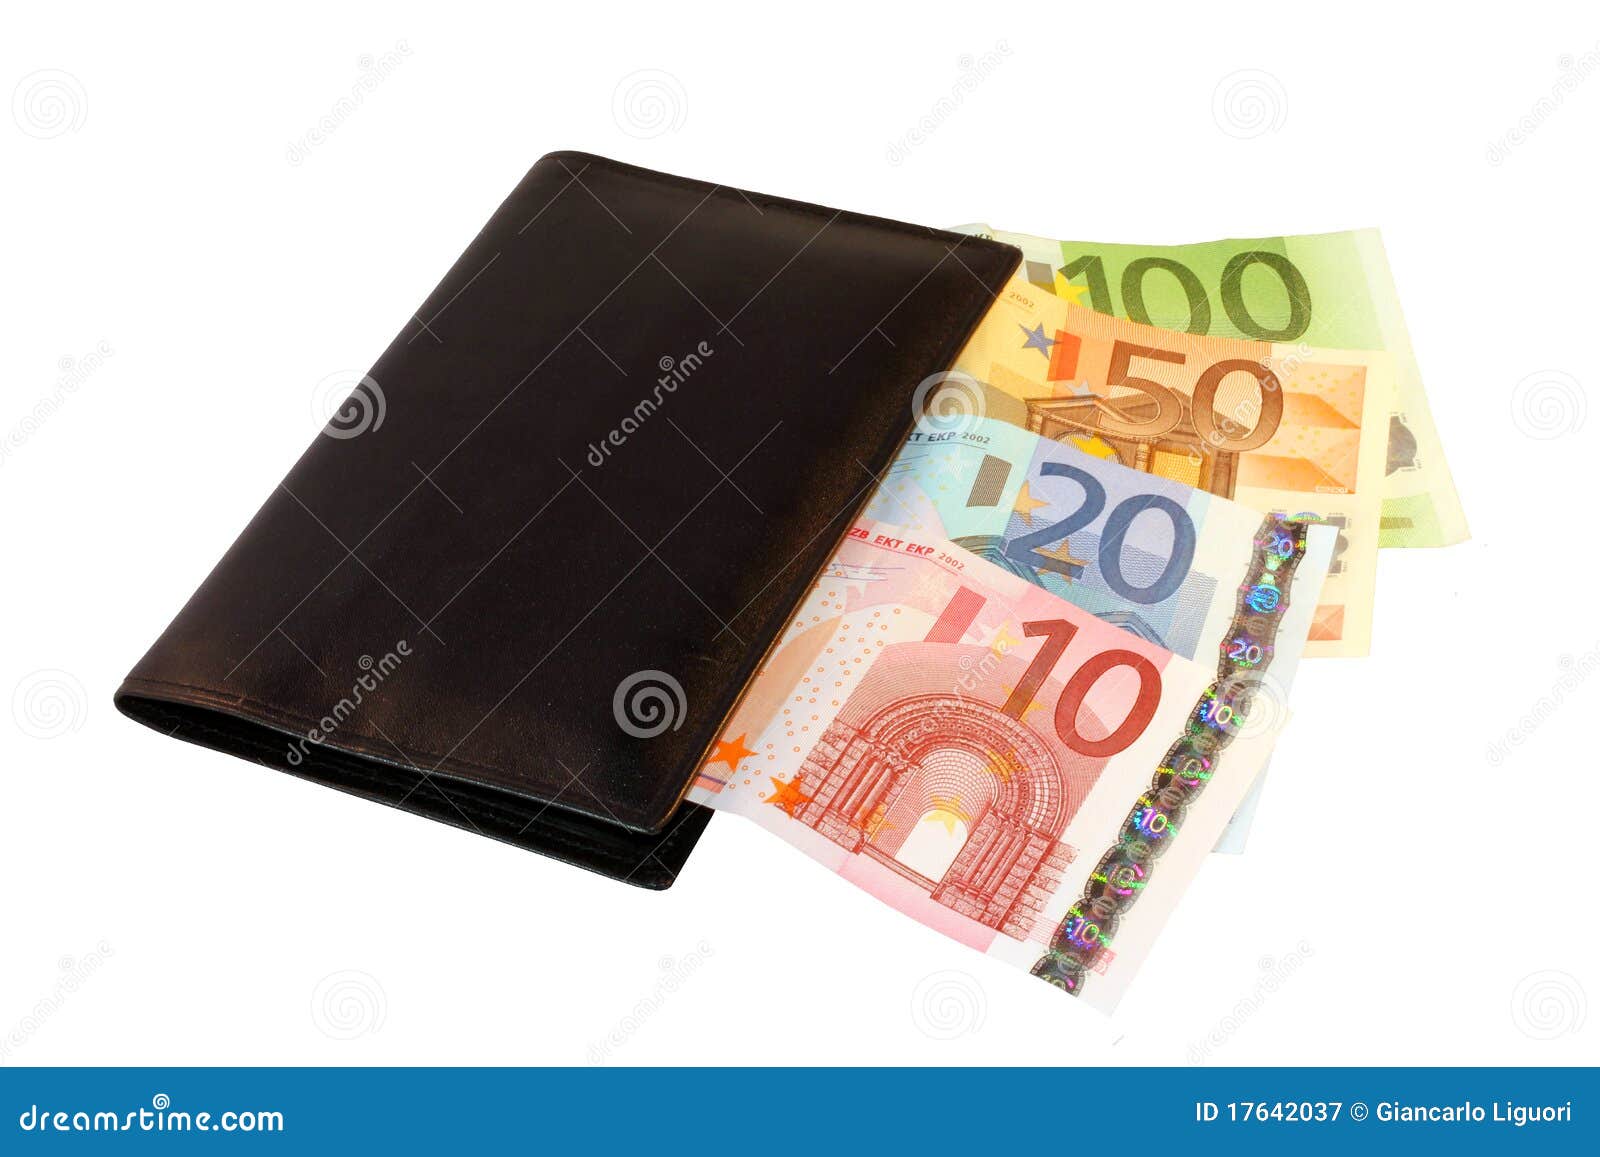 Wallet With Euros Royalty Free Stock Photography - Image: 17642037